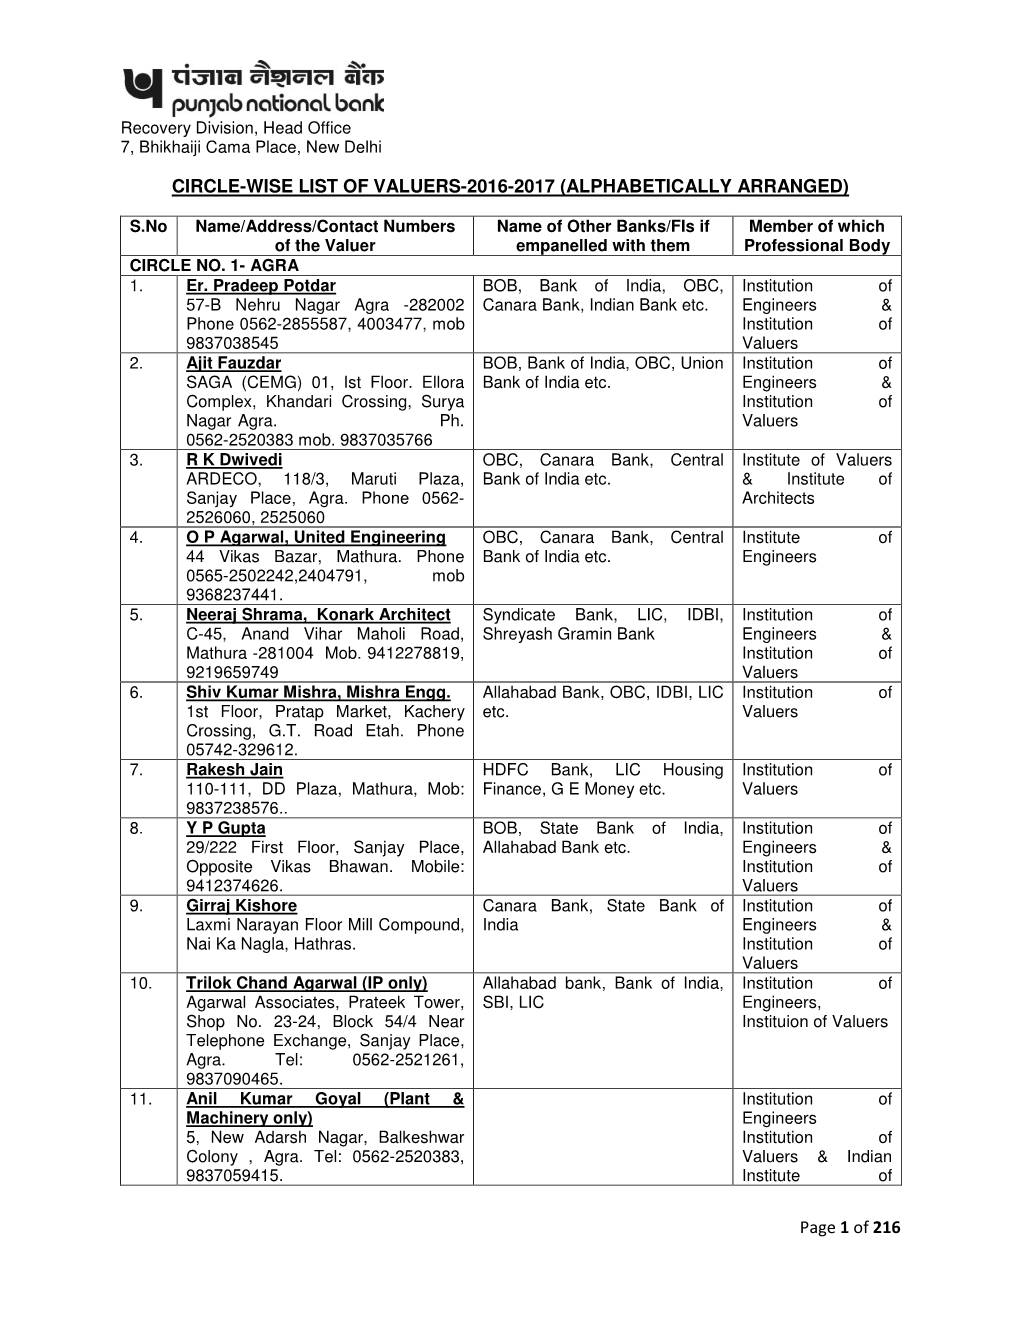 Page 1 of 216 CIRCLE-WISE LIST of VALUERS-2016-2017